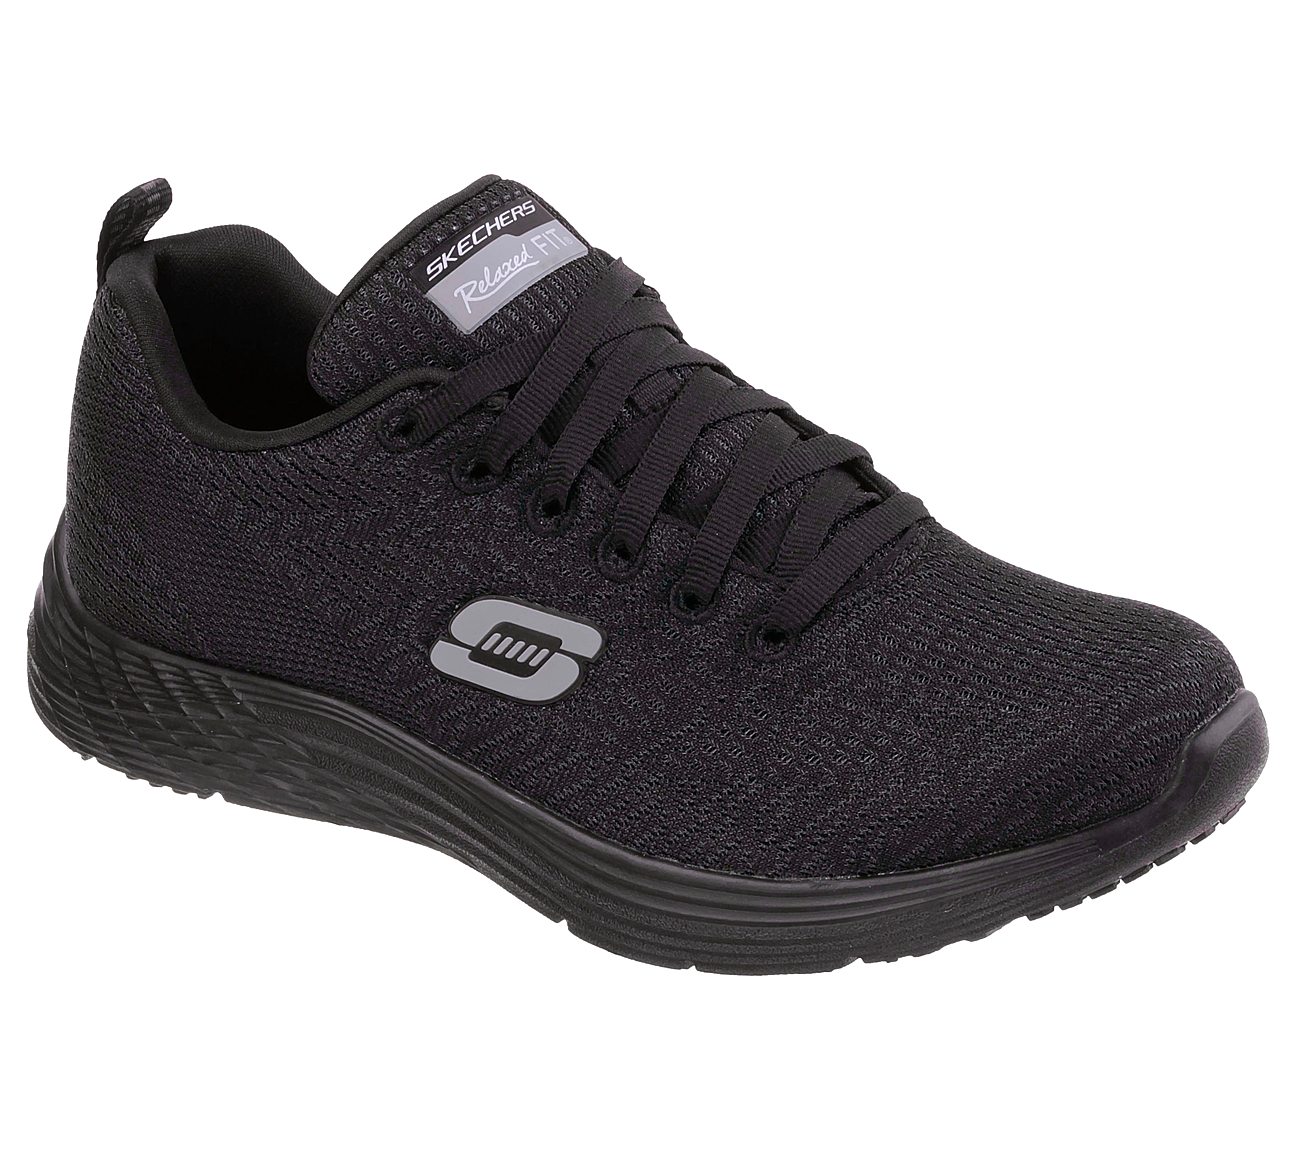 Chimera SKECHERS Relaxed Fit Shoes